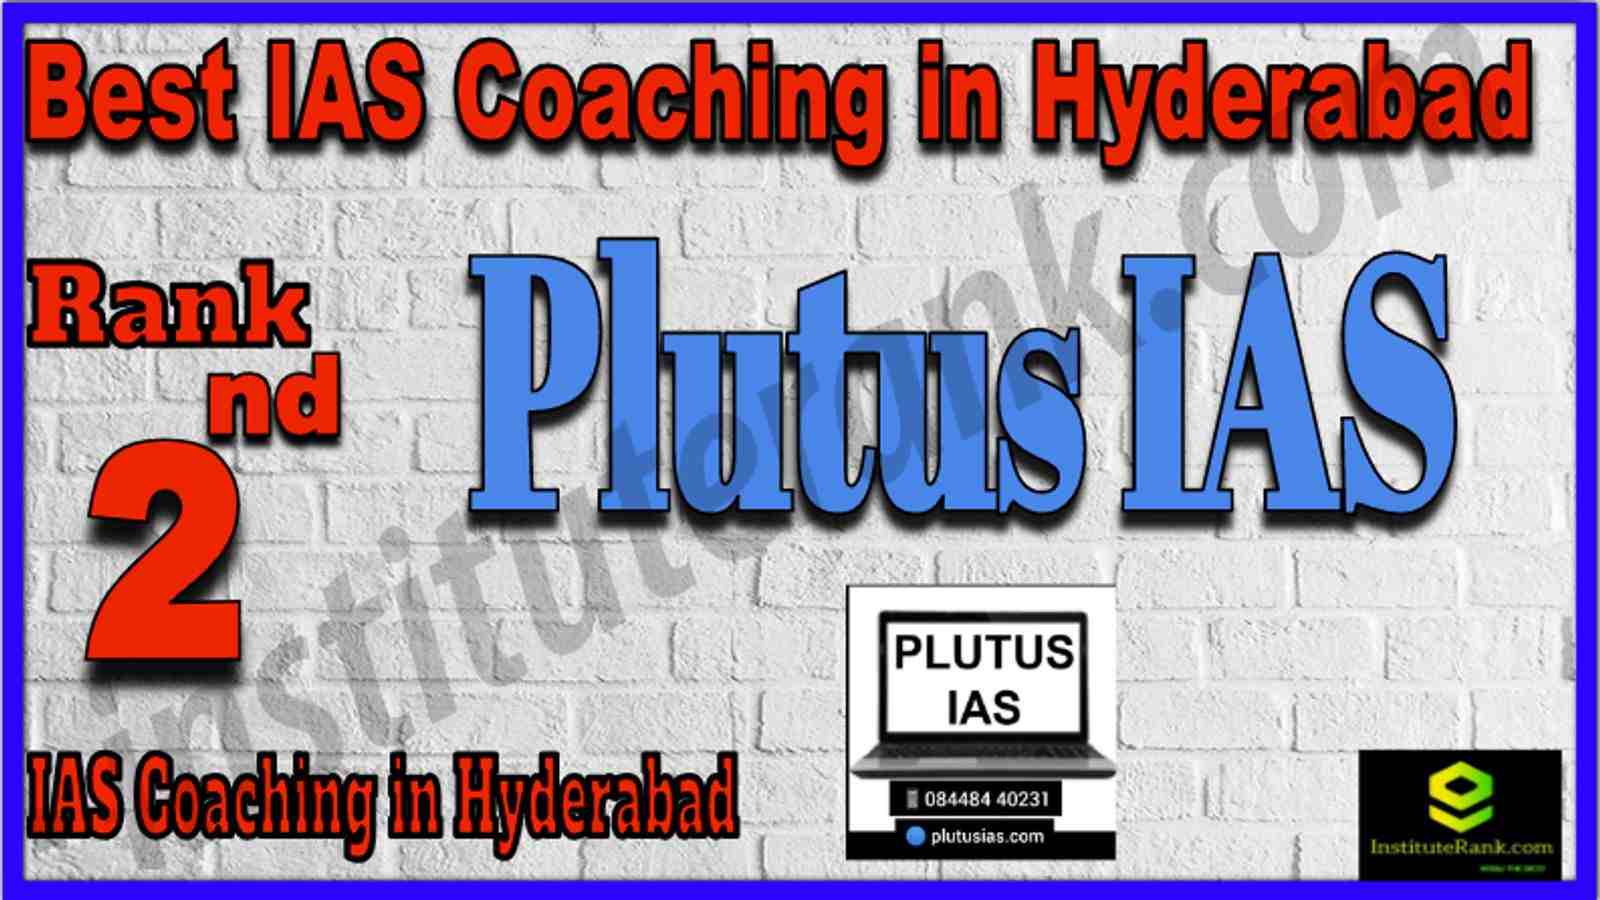 2nd Best IAS Coaching in Hyderabad 2022